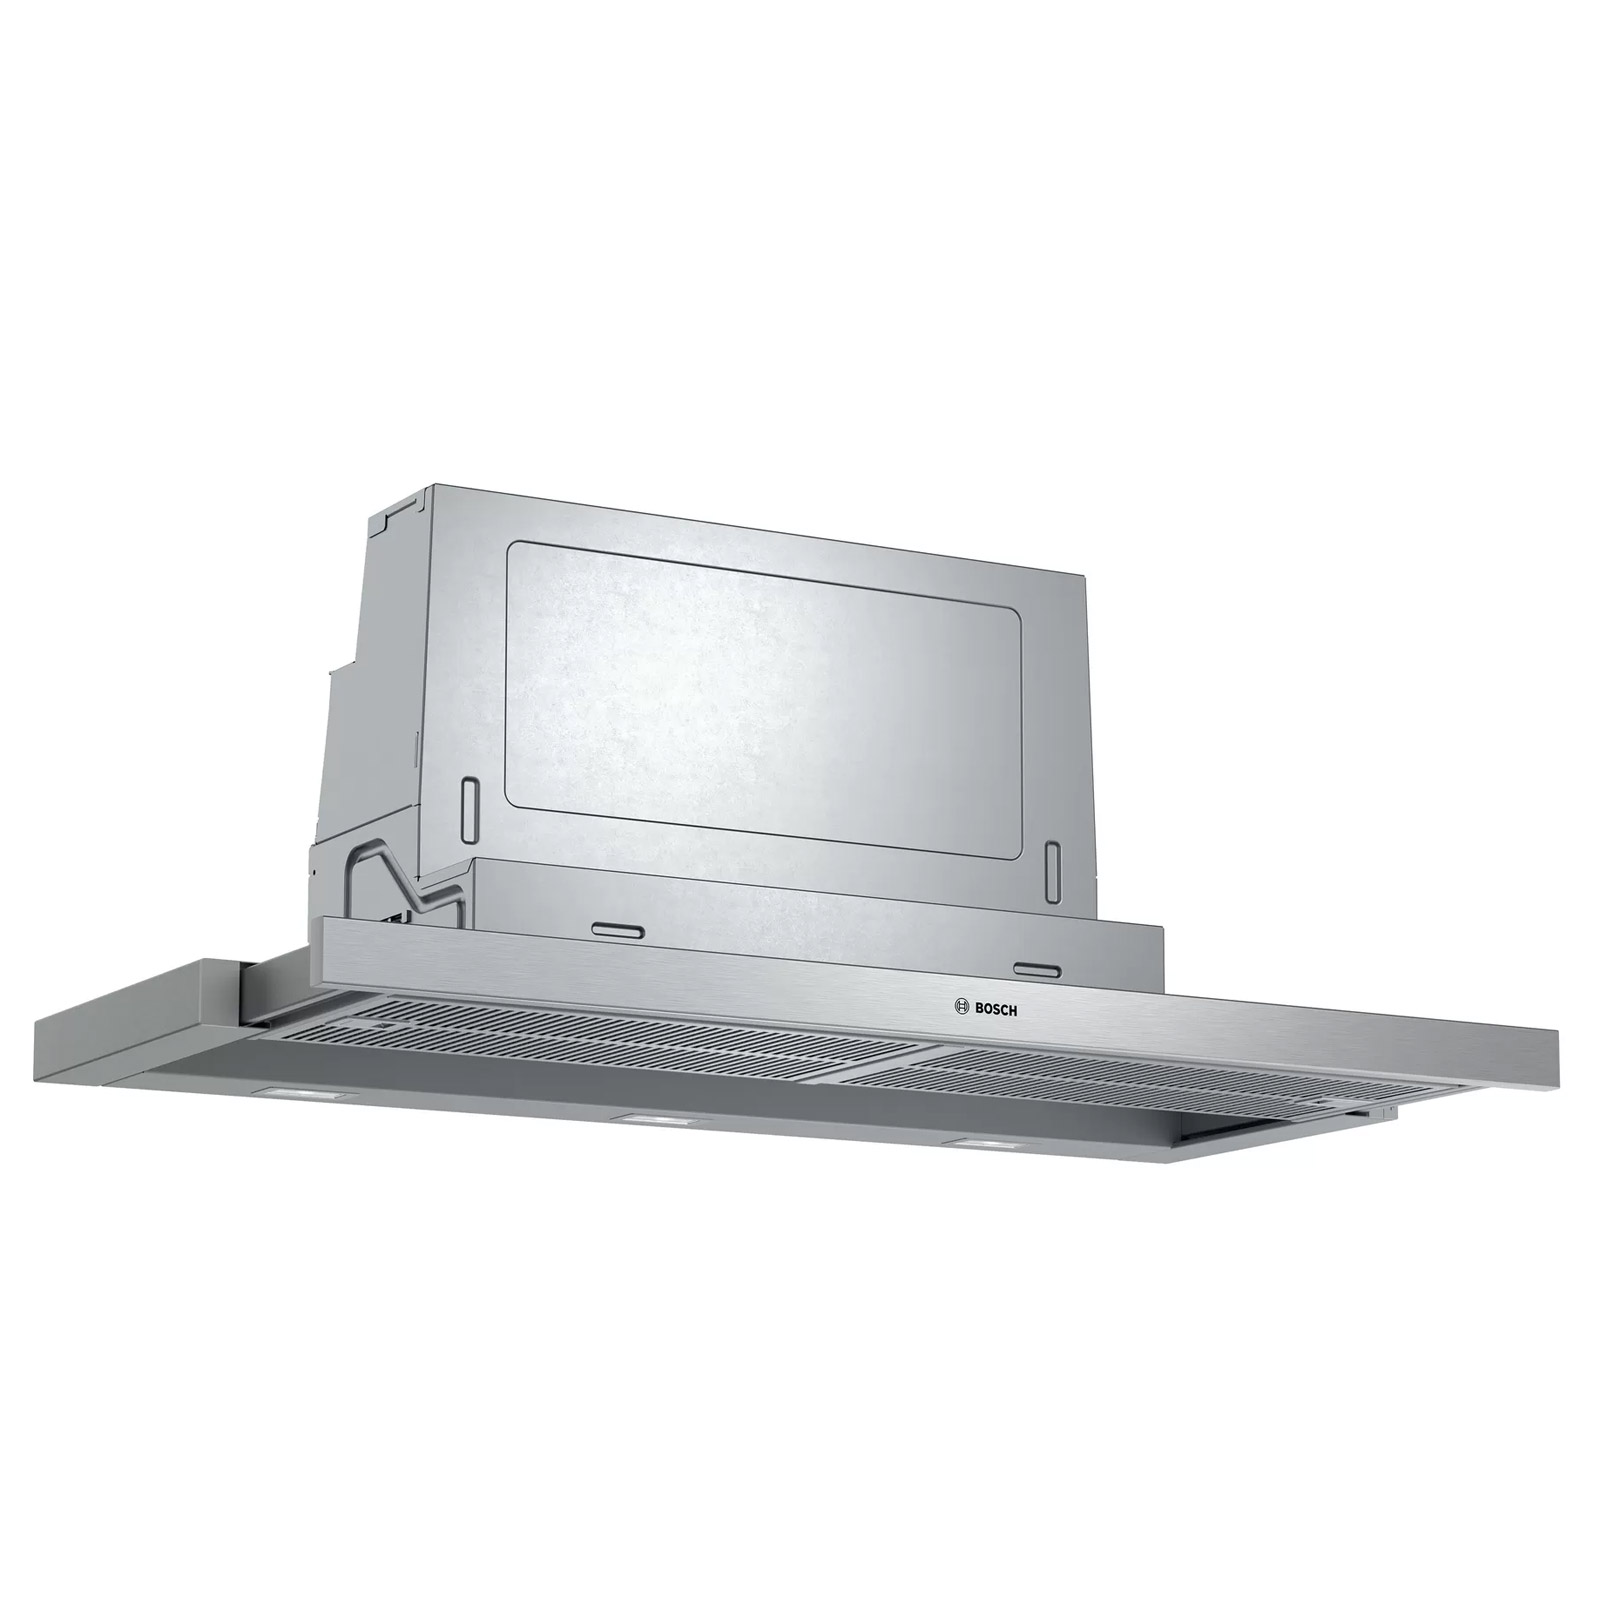 Image of Bosch DFS097A51B Series 4 90cm Telescopic Cooker Hood in Silver